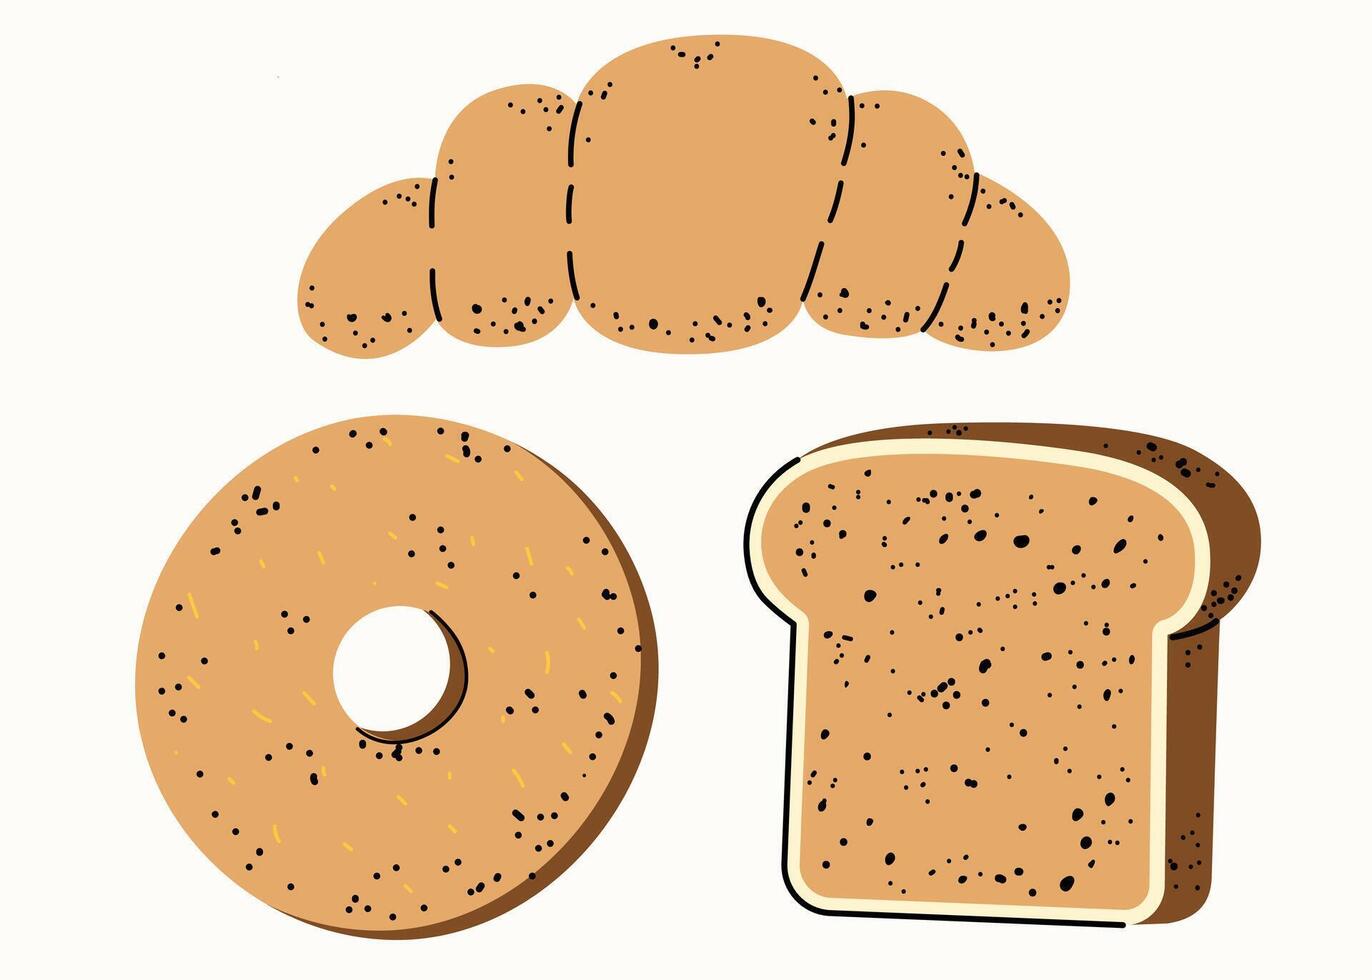 Healthy breakfast. Croissant, donut and toast, bread. Set of vector flat illustrations in hand drawn style. Delicious dishes. Cartoon food icons. Isolated on a white background.